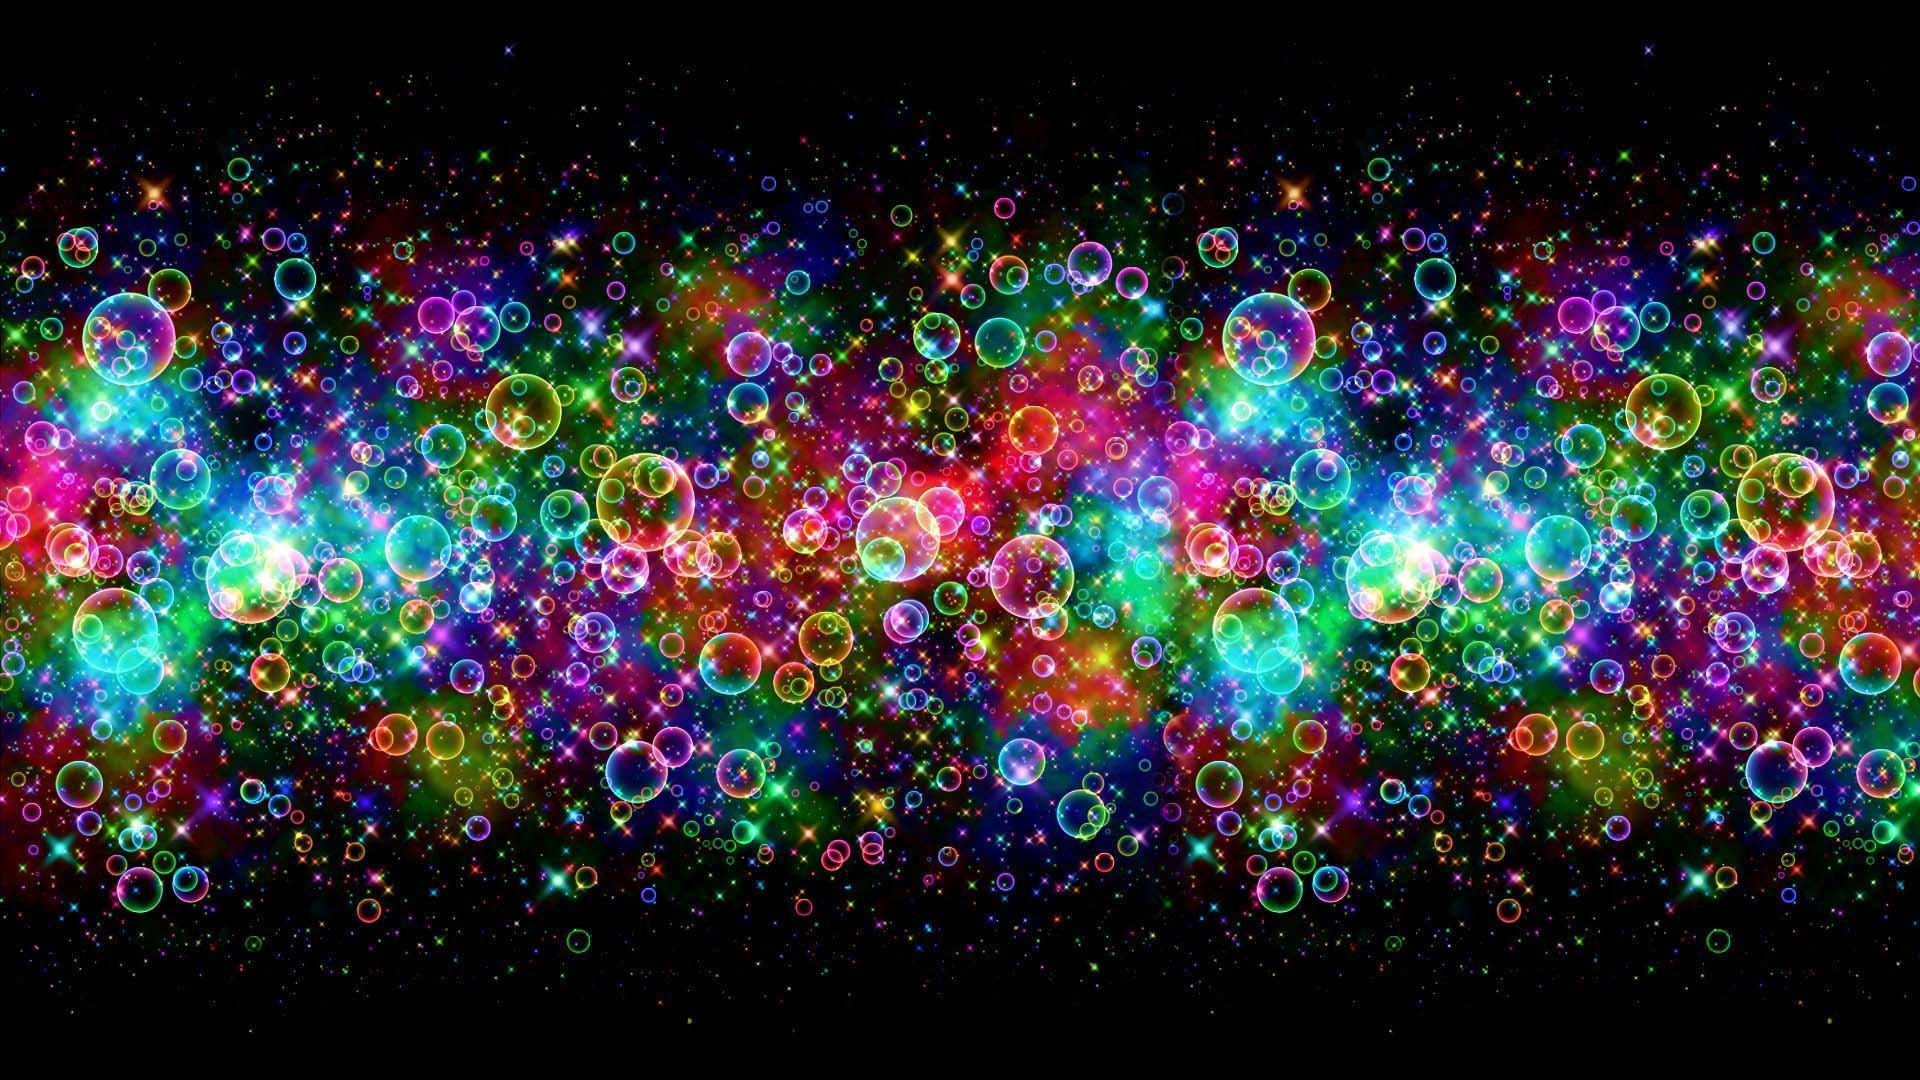 1920x1080  Sparkly Backgrounds That Move Wallpaper | All HD Wallpapers 17  best phone wallpaper ideas images on Pinterest | Wallpaper .